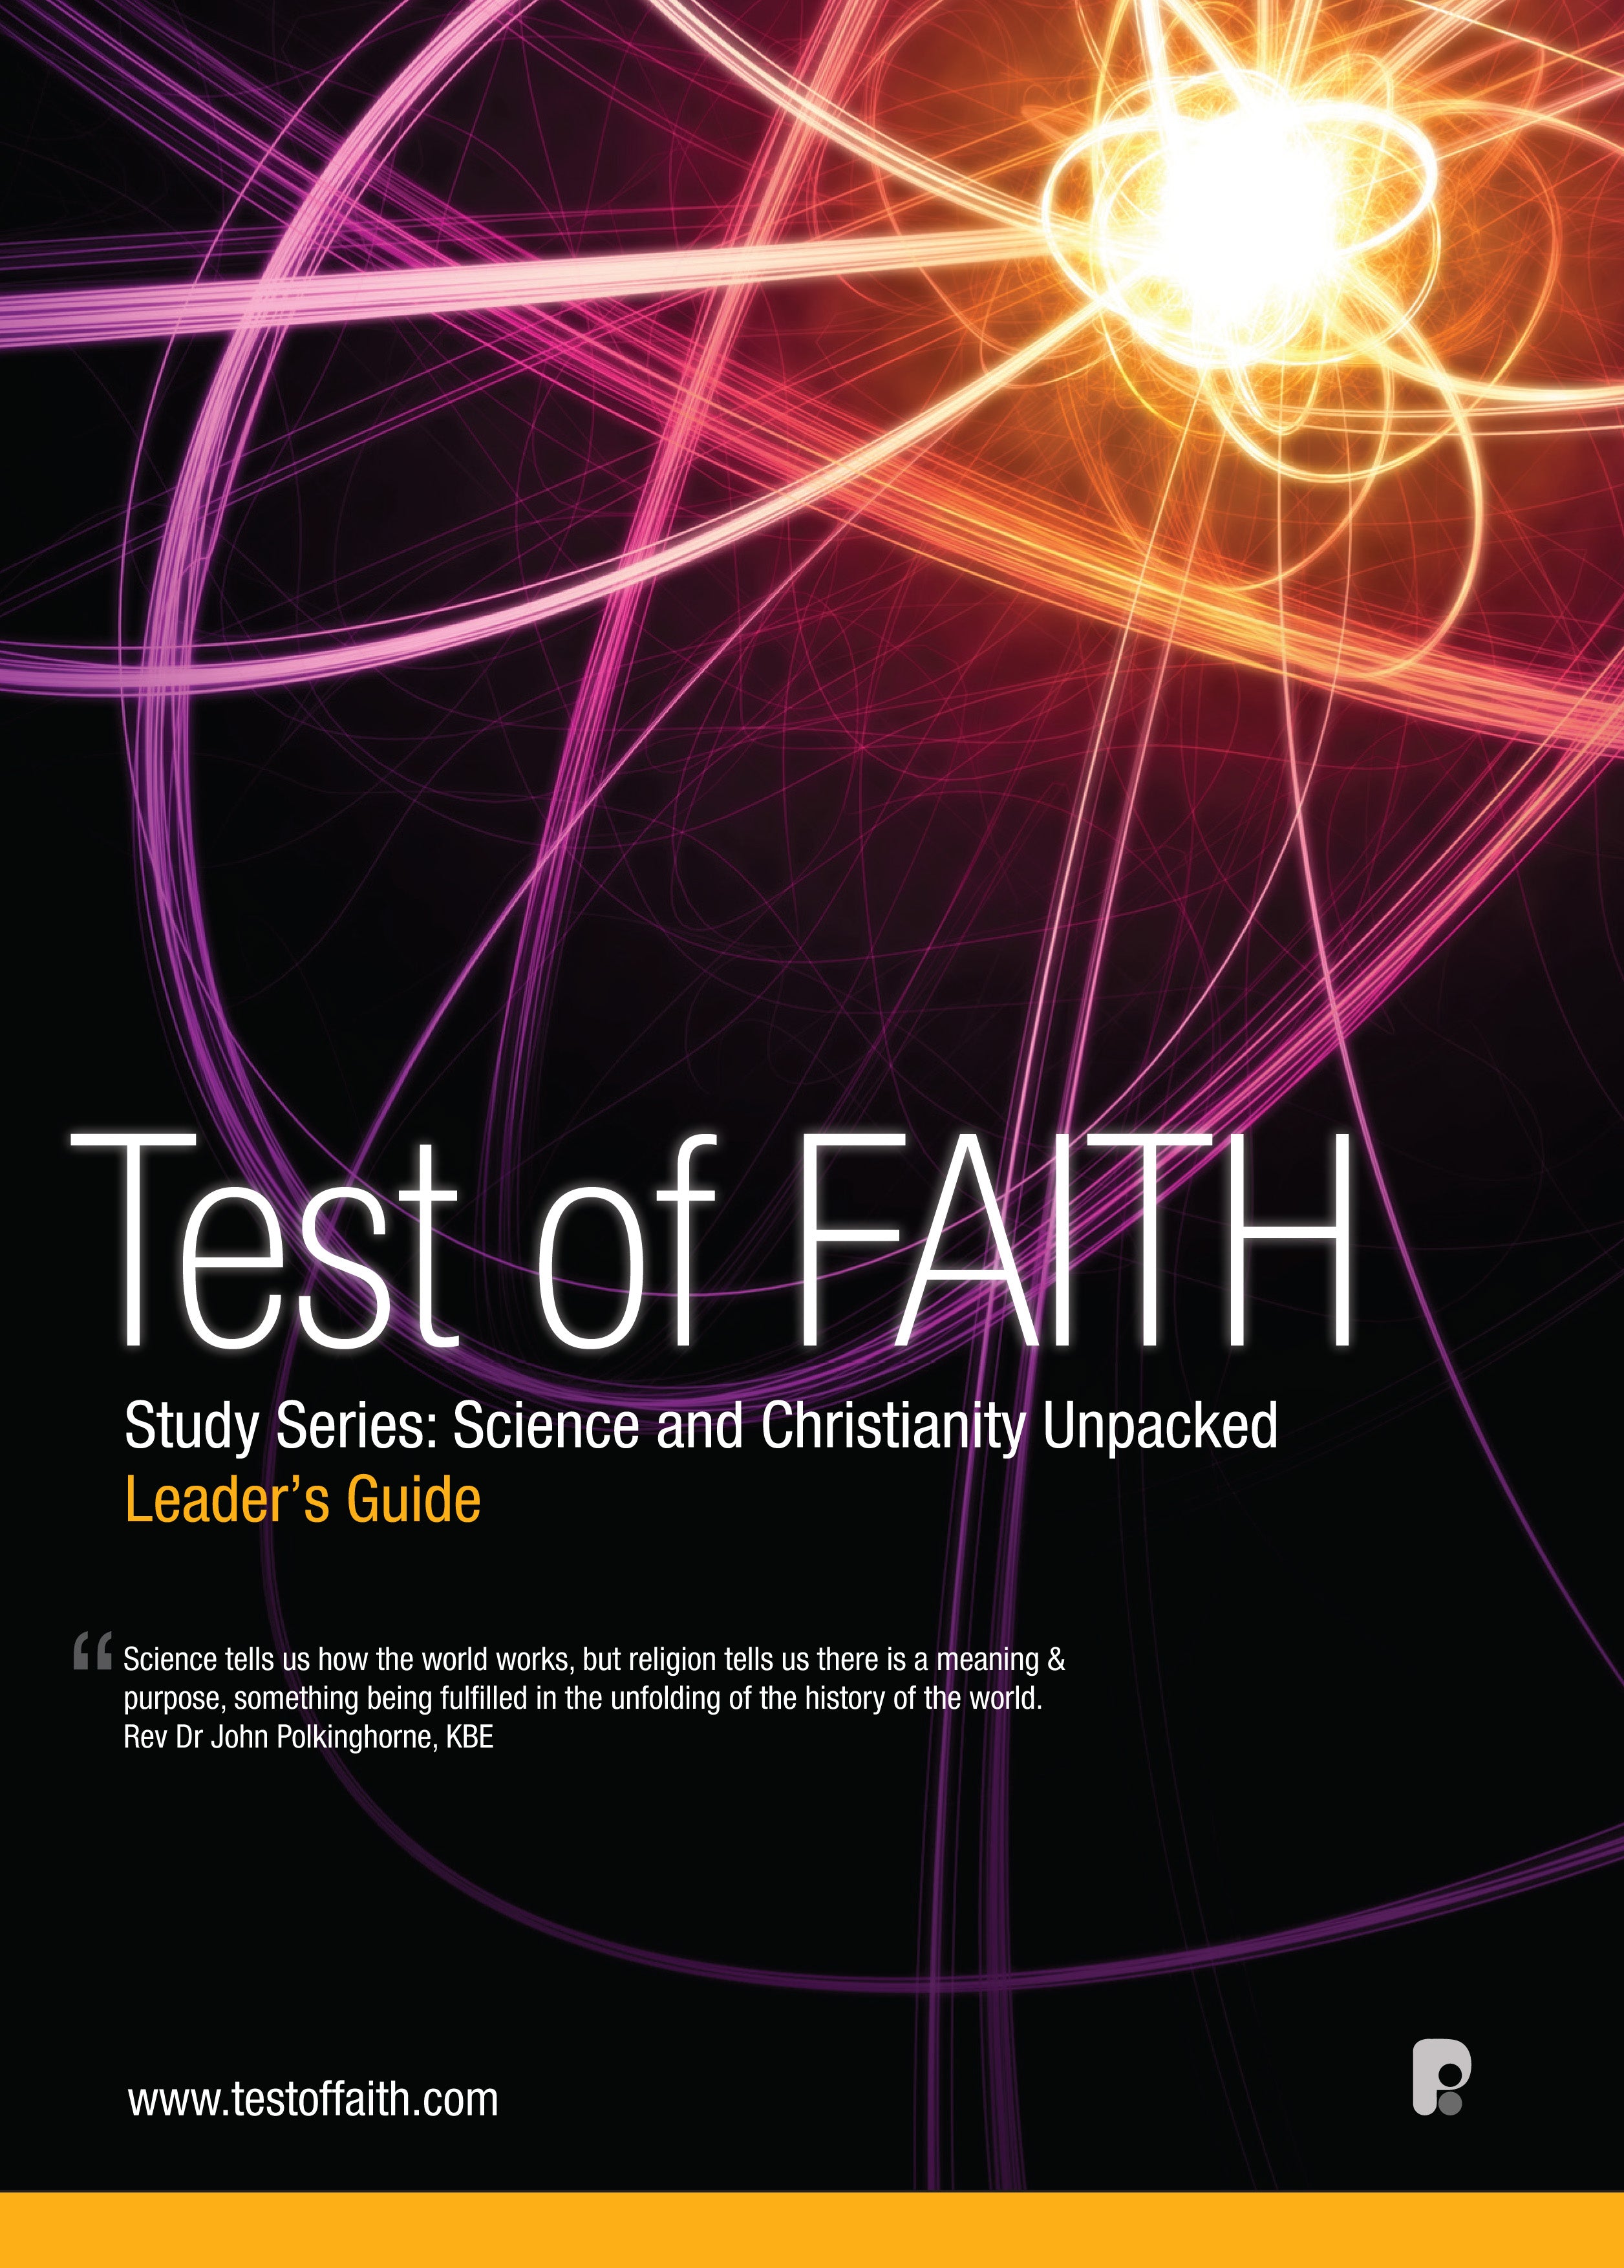 Image of Test of Faith Leader's Guide other